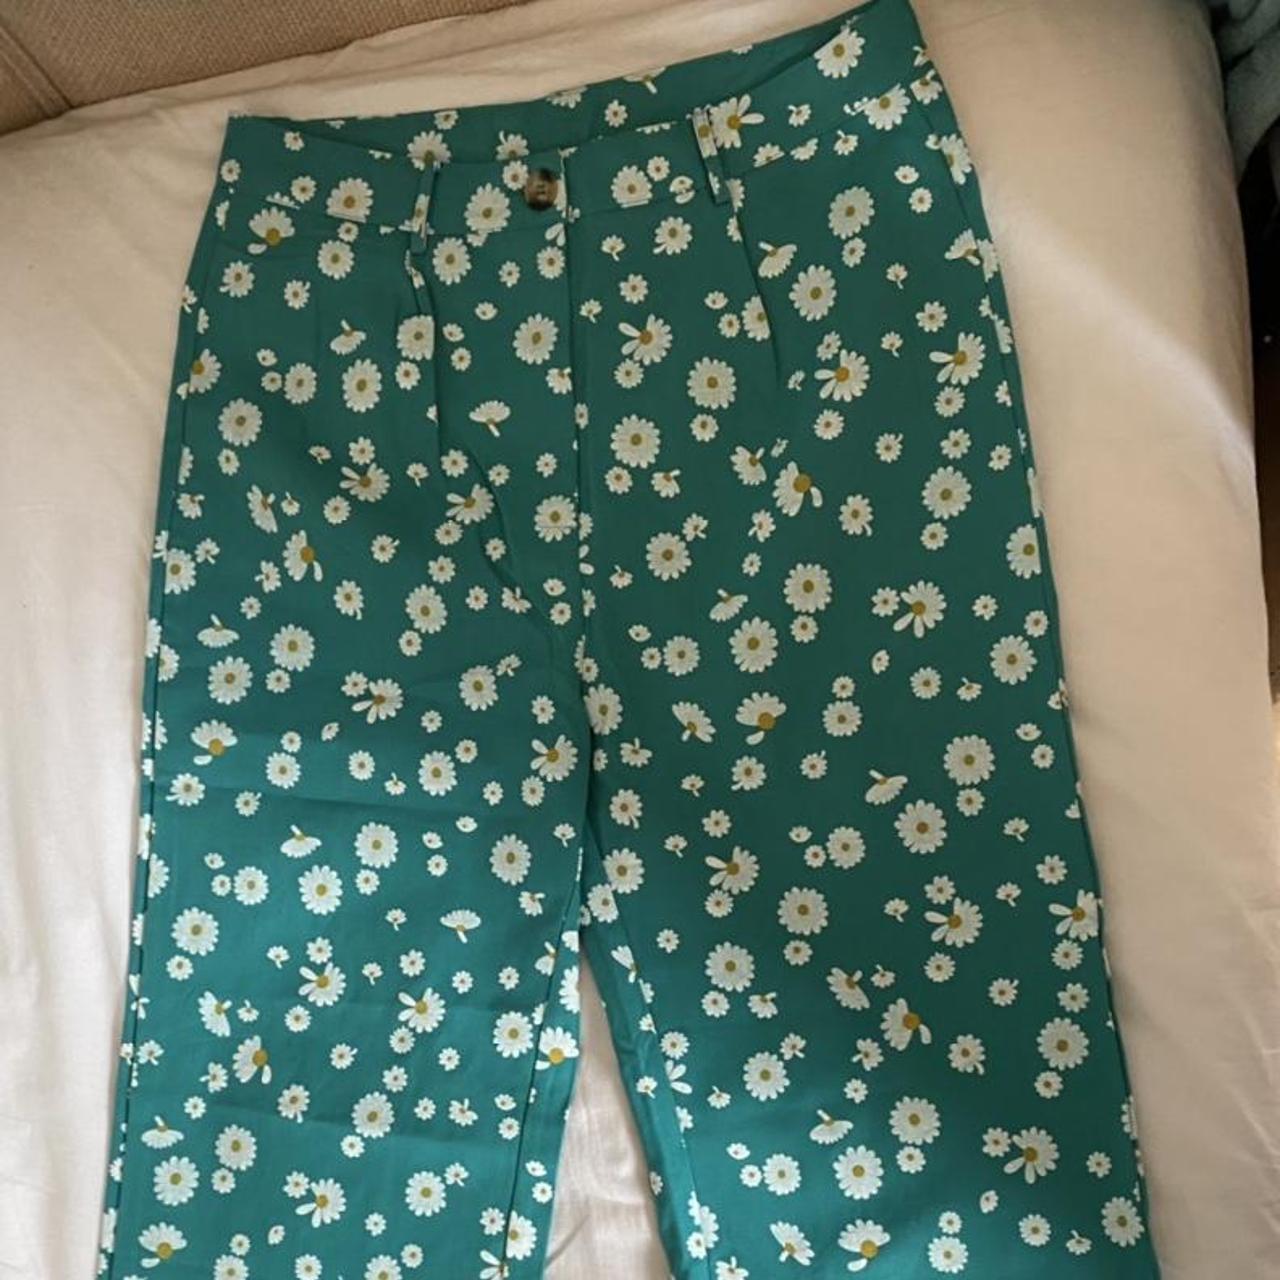 SHEIN Women's Green and White Trousers | Depop